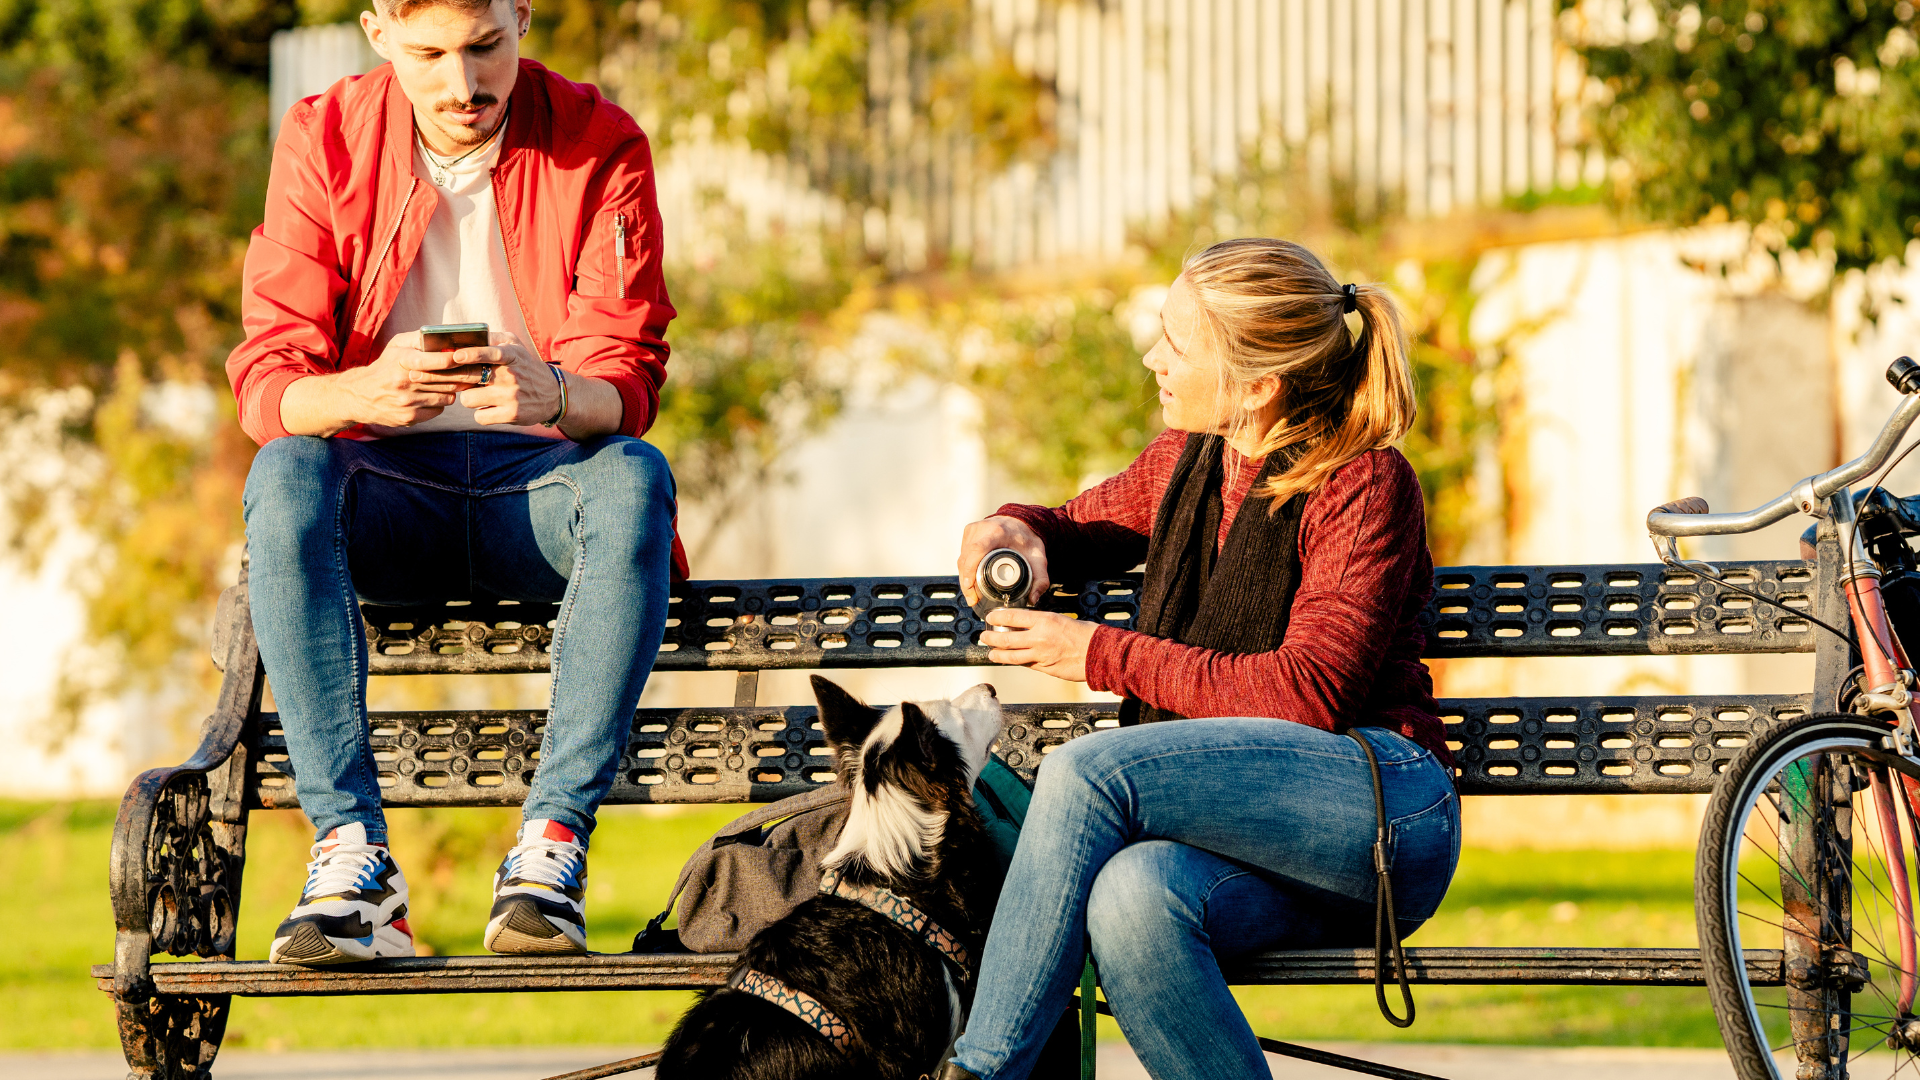 Socializing Your Dog in an Urban Environment